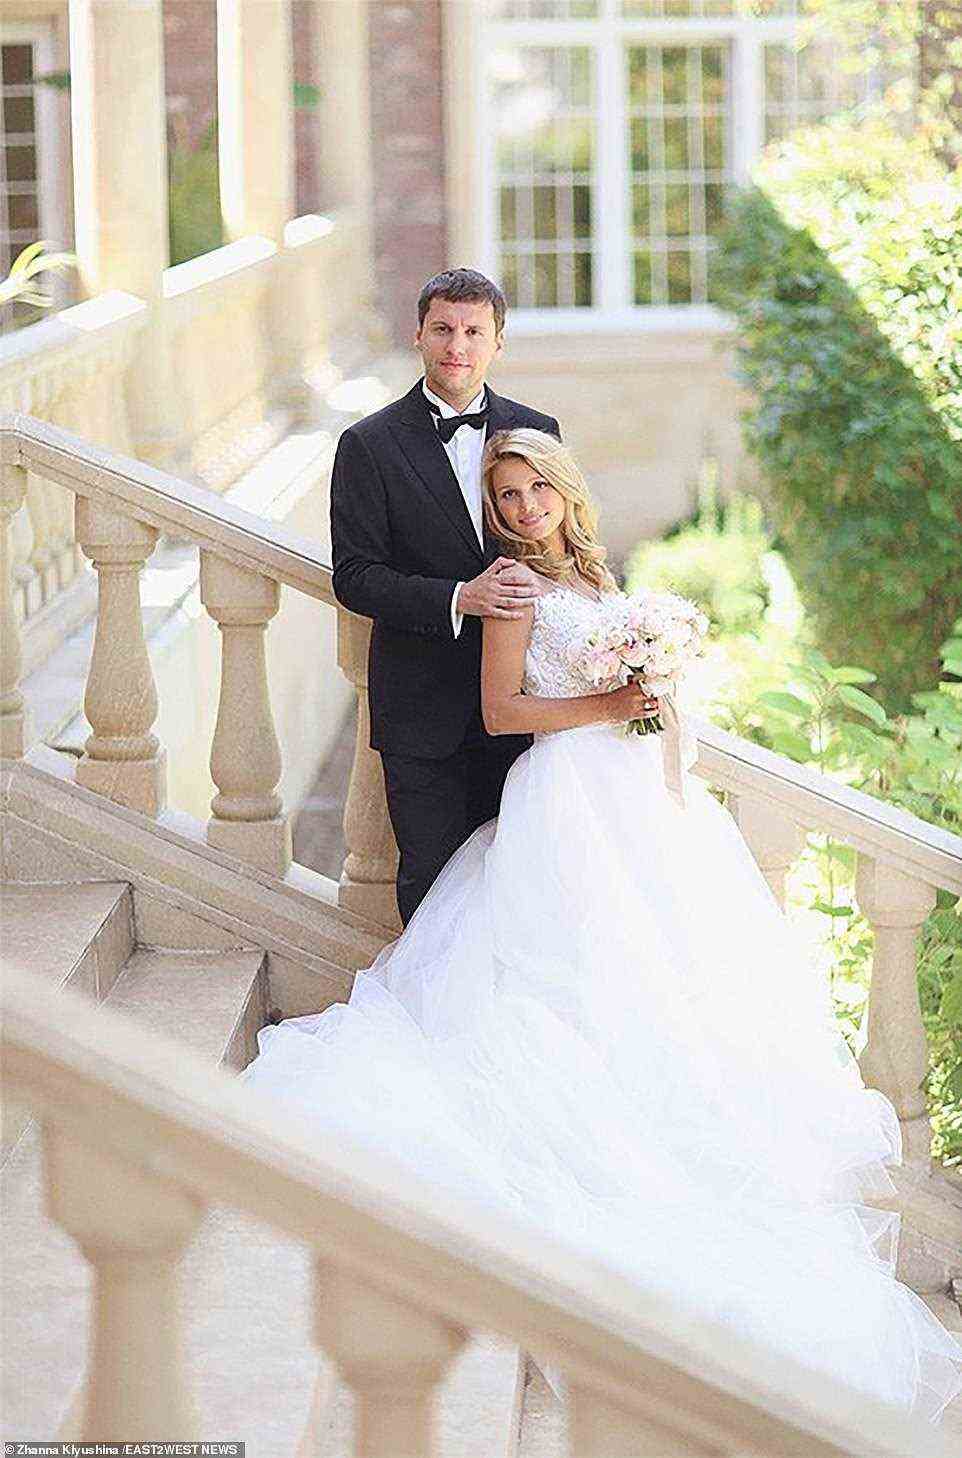 Vladislav Klyushin, a Russian businessman with close ties to the Kremlin married former secretary Zhanna at the Agalarov Golf & Country Club, west of Moscow. It is owned by billionaire developer Aras Agalarov, a close Putin associate